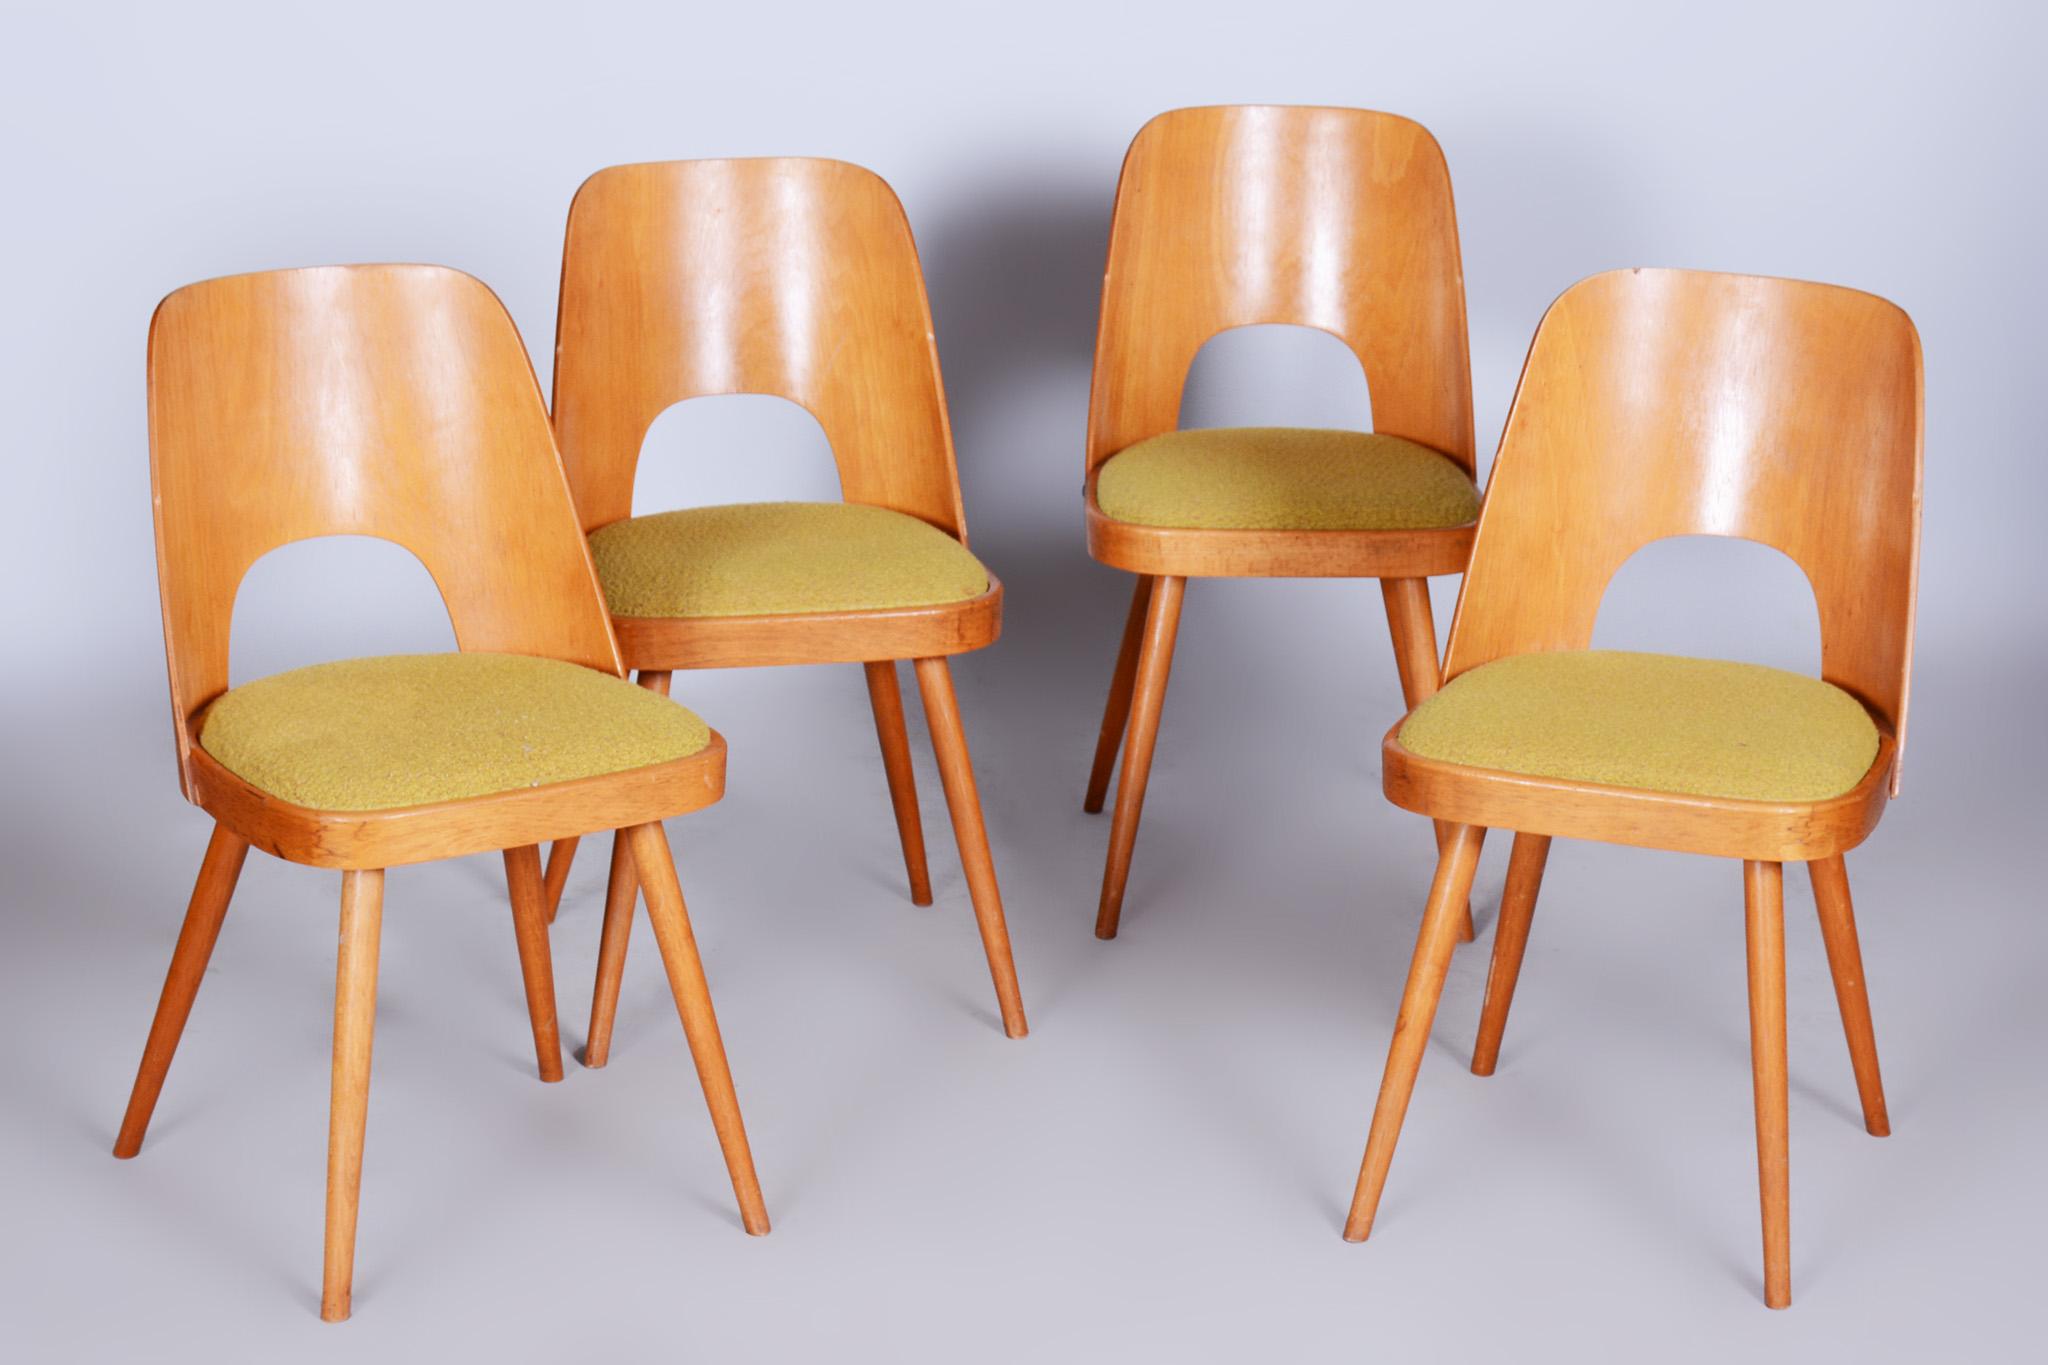 Set of Mid-Century Brown and Yellow Beech Chairs, Oswald Haerdtl, 1950s, Czechia In Good Condition For Sale In Horomerice, CZ